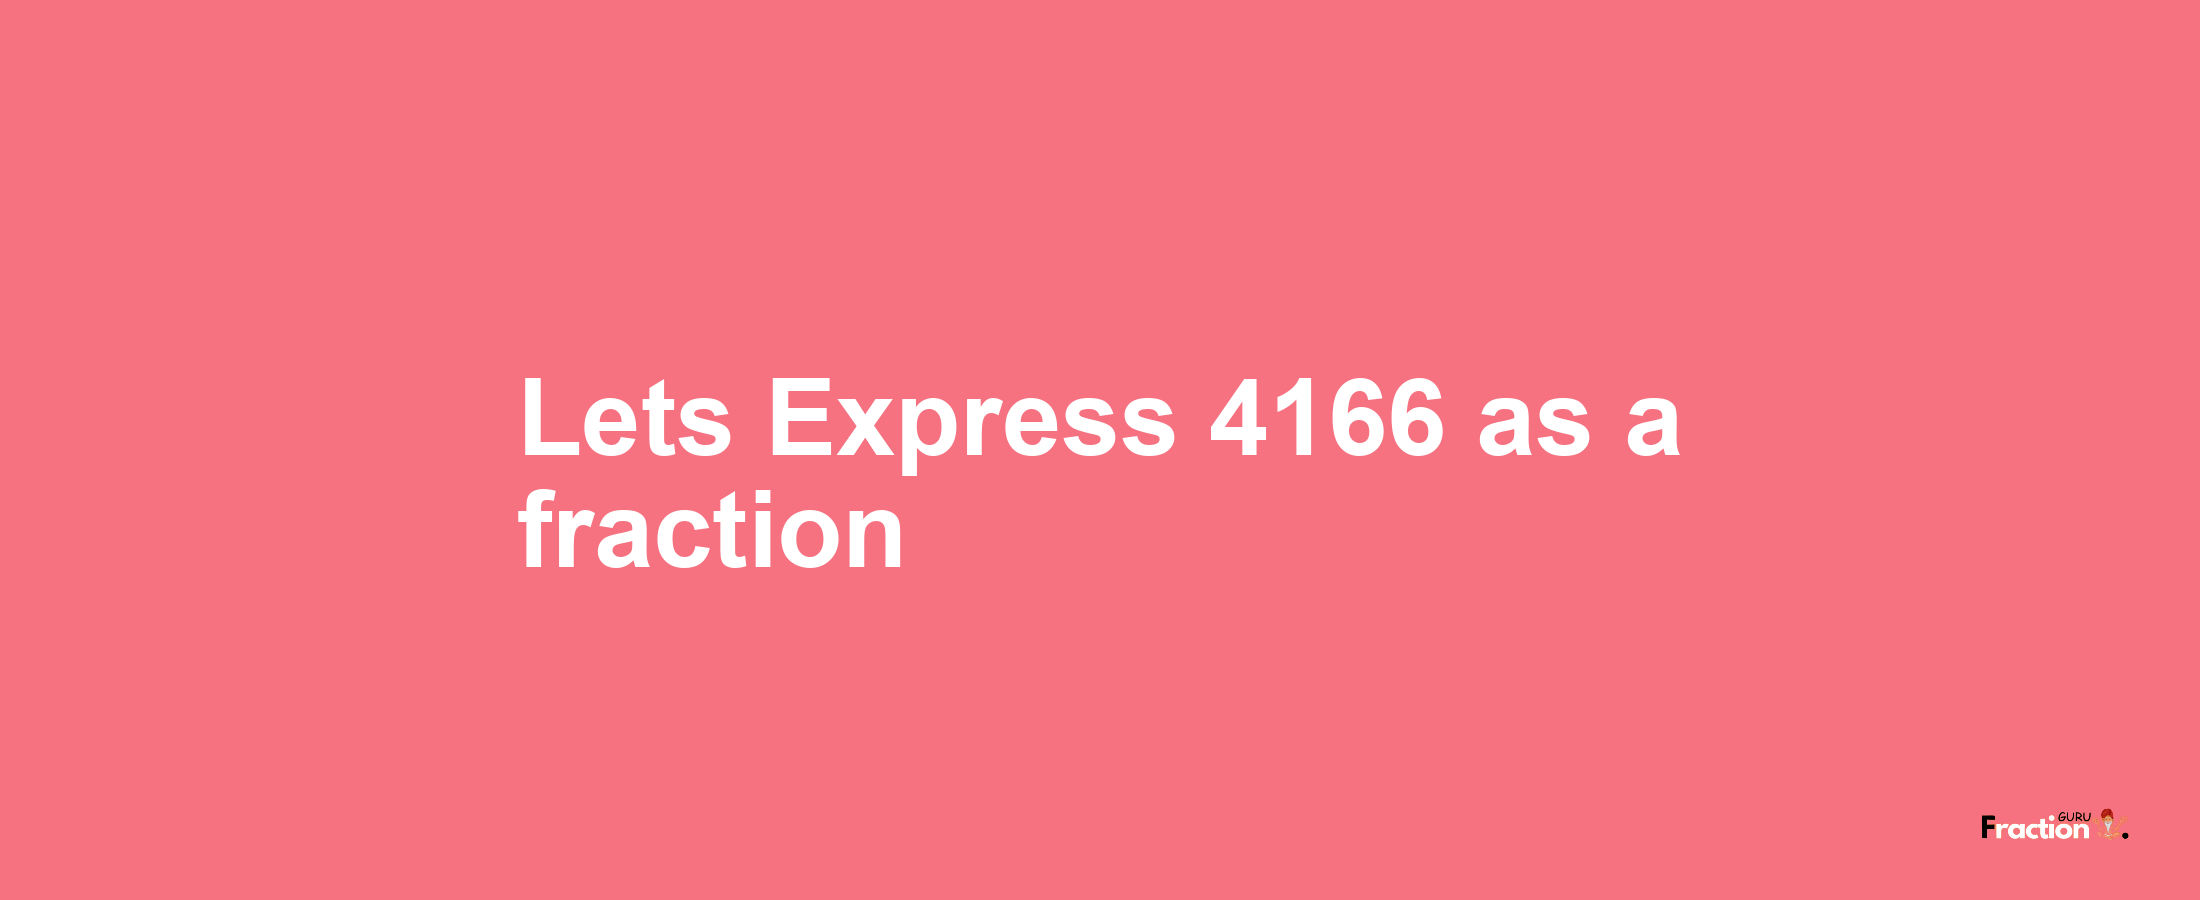 Lets Express 4166 as afraction